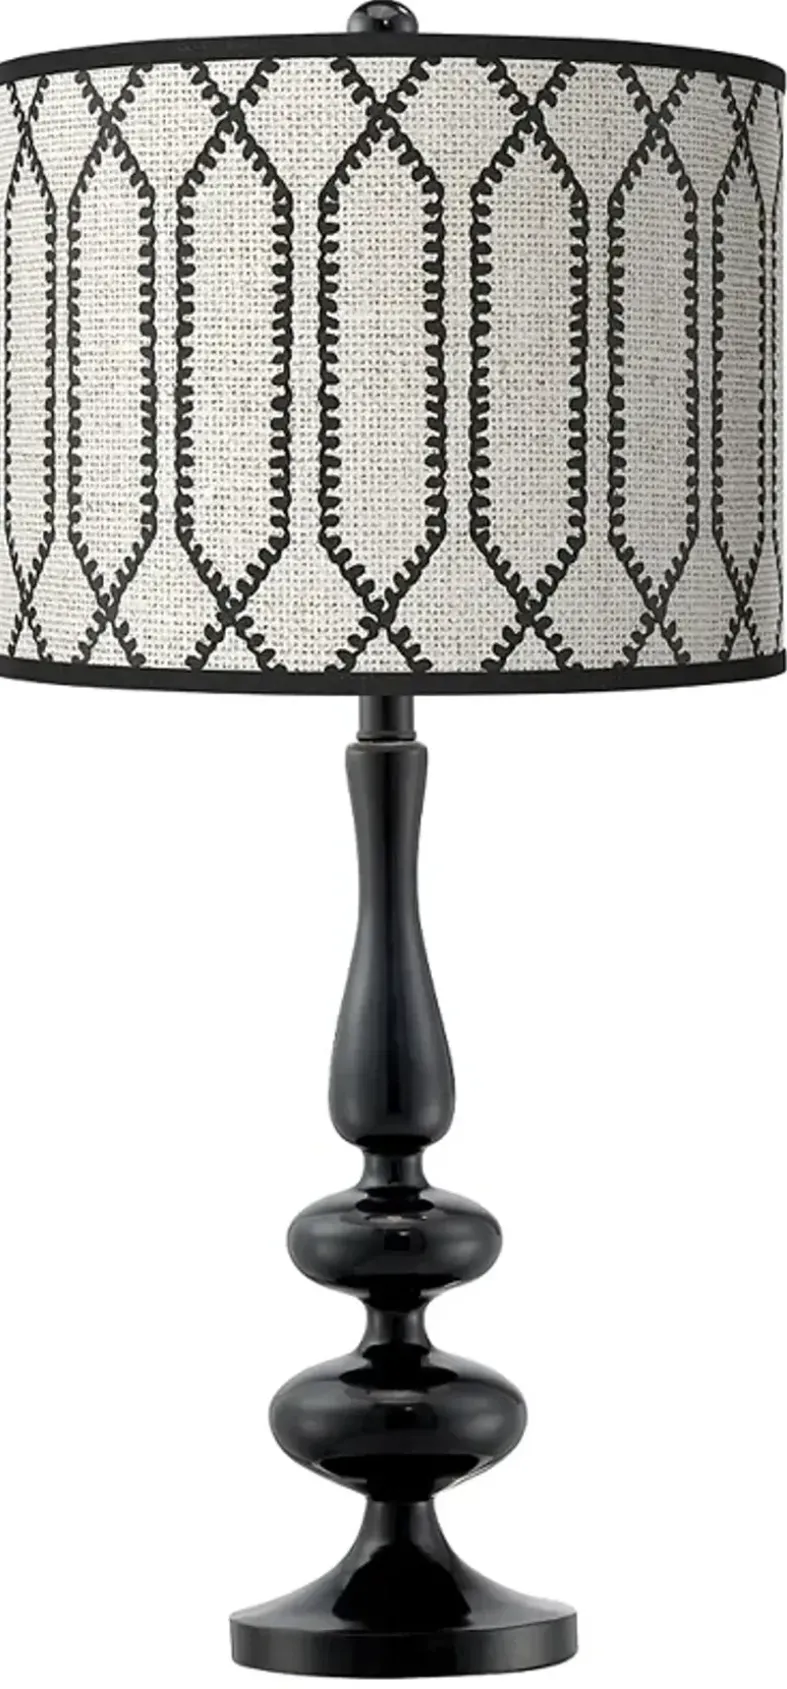 Rustic Chic Giclee Paley Black Table Lamp